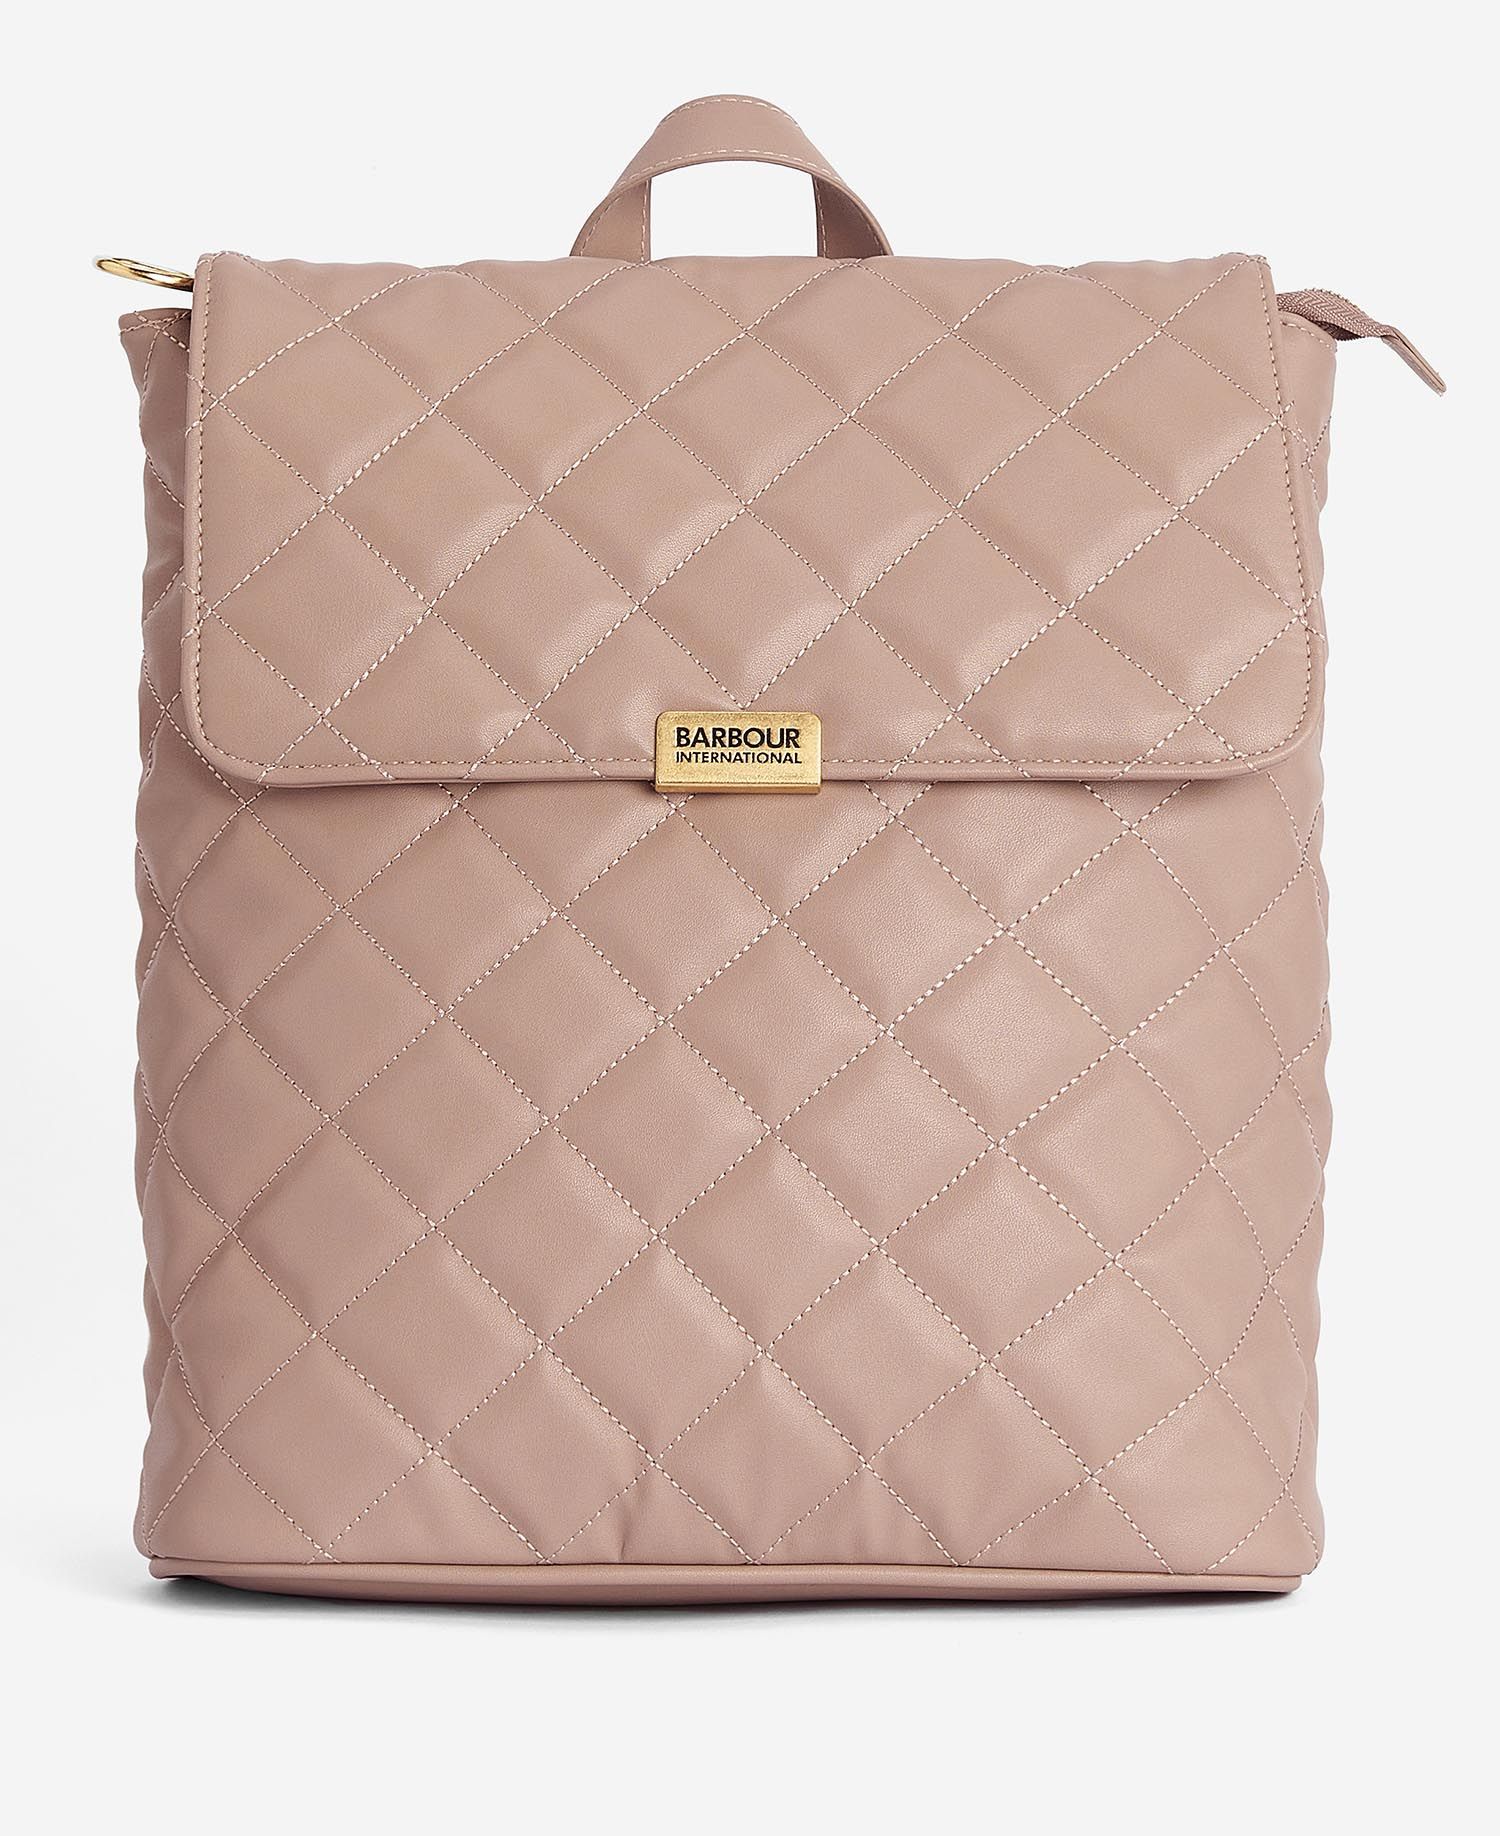 Quilted Hoxton Backpack